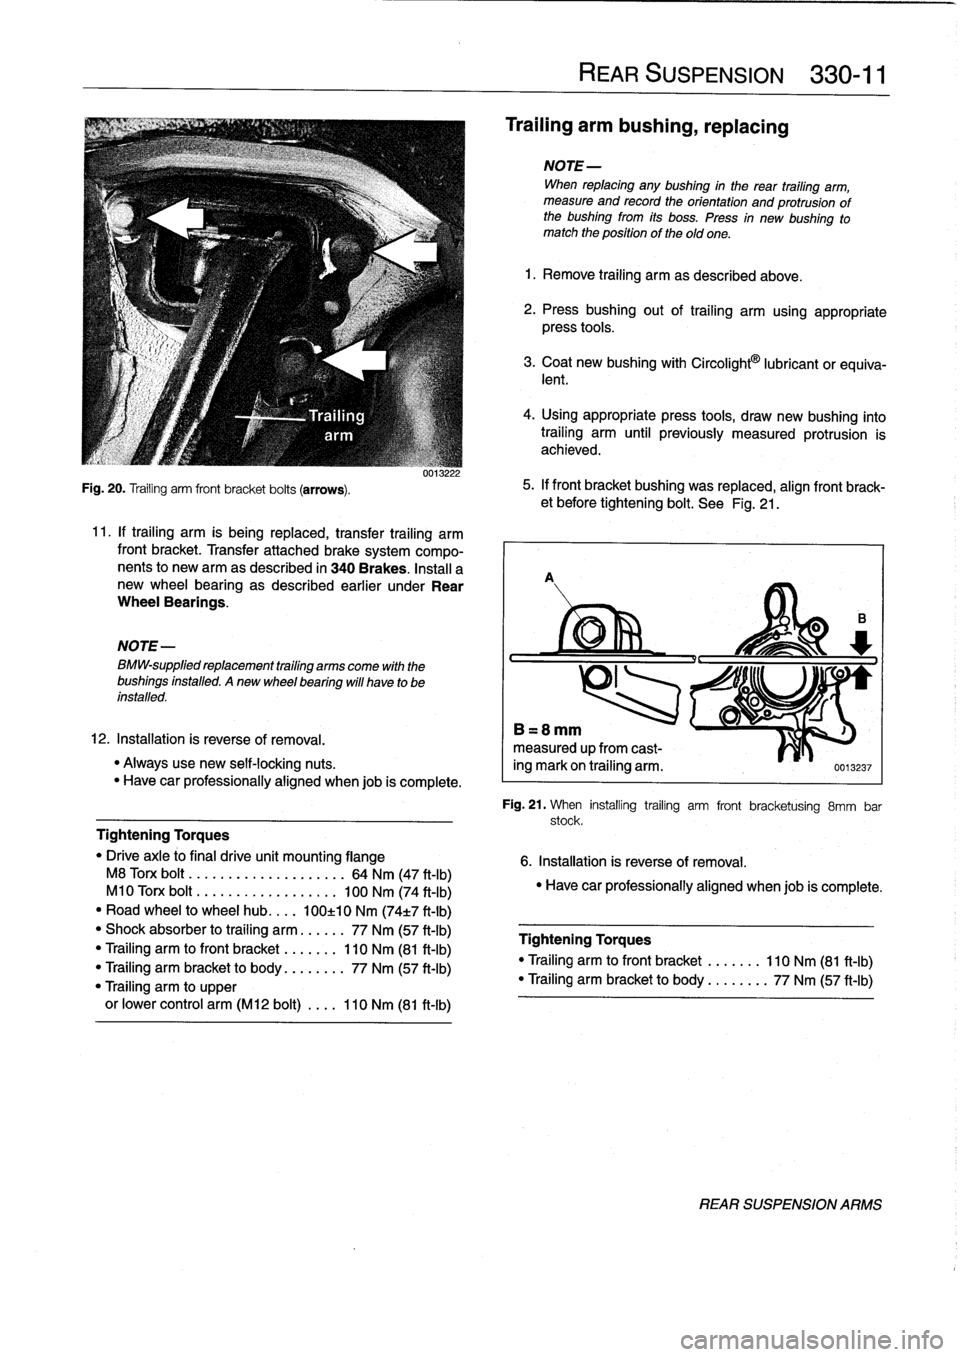 BMW 328i 1994 E36 Owners Guide 
Fig
.
20
.
Trailing
arm
front
bracket
bolts
(arrows)
.

NOTE-

BMW-supplied
replacement
trailing
arms
come
with
the
bushings
installed
.
Anew
wheel
bearing
will
have
to
be
installed
.

0013222

11
.
